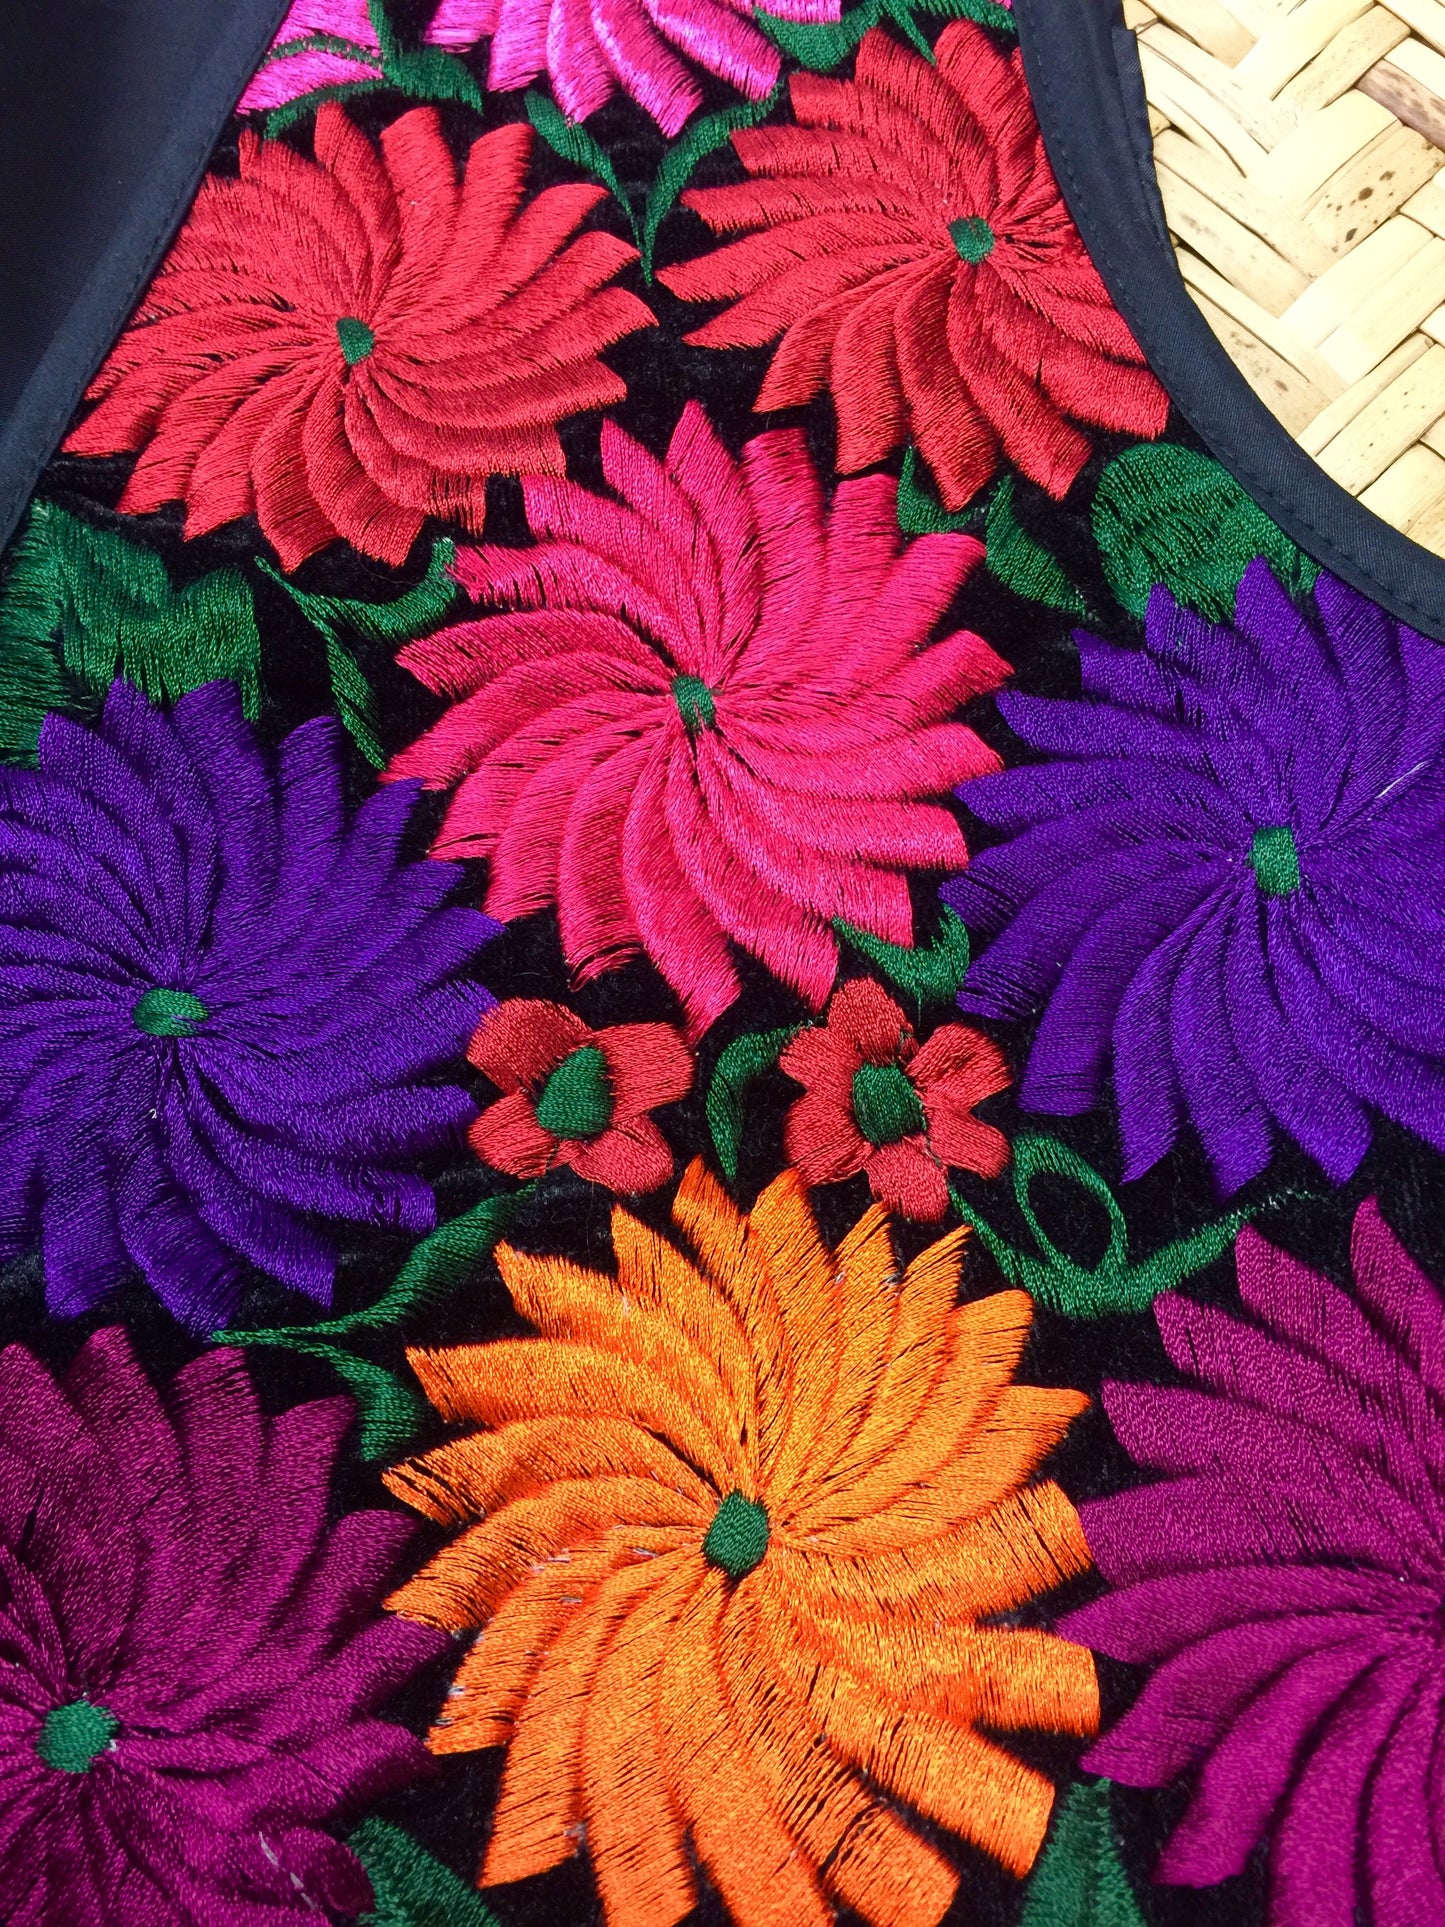 Embroidery vest from Chiapas